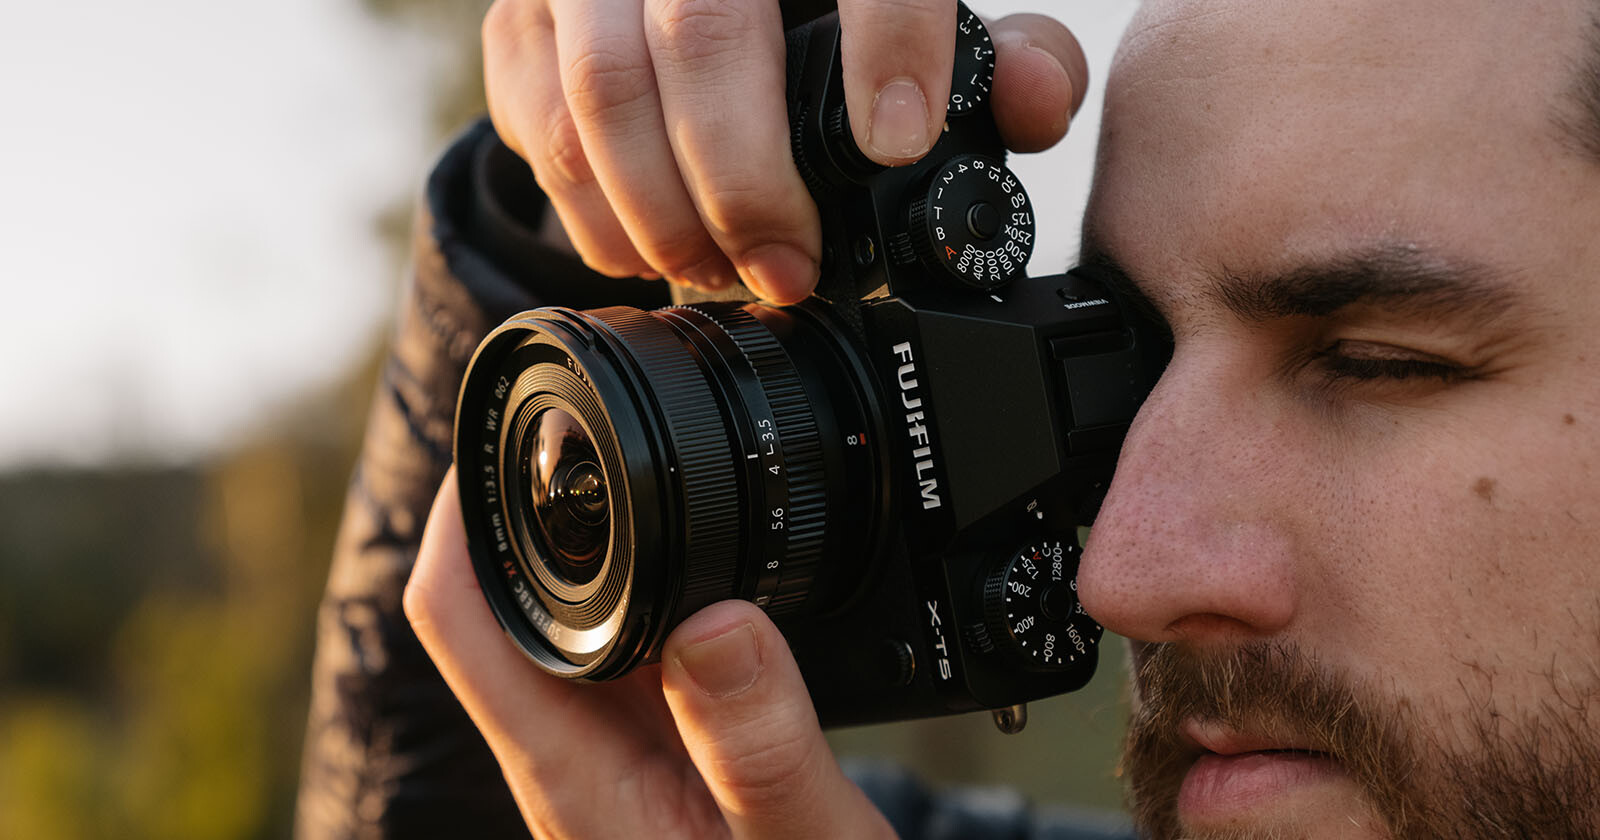 Fujifilm’s $799 8mm f/3.5 R WR is Its Widest XF Prime Lens